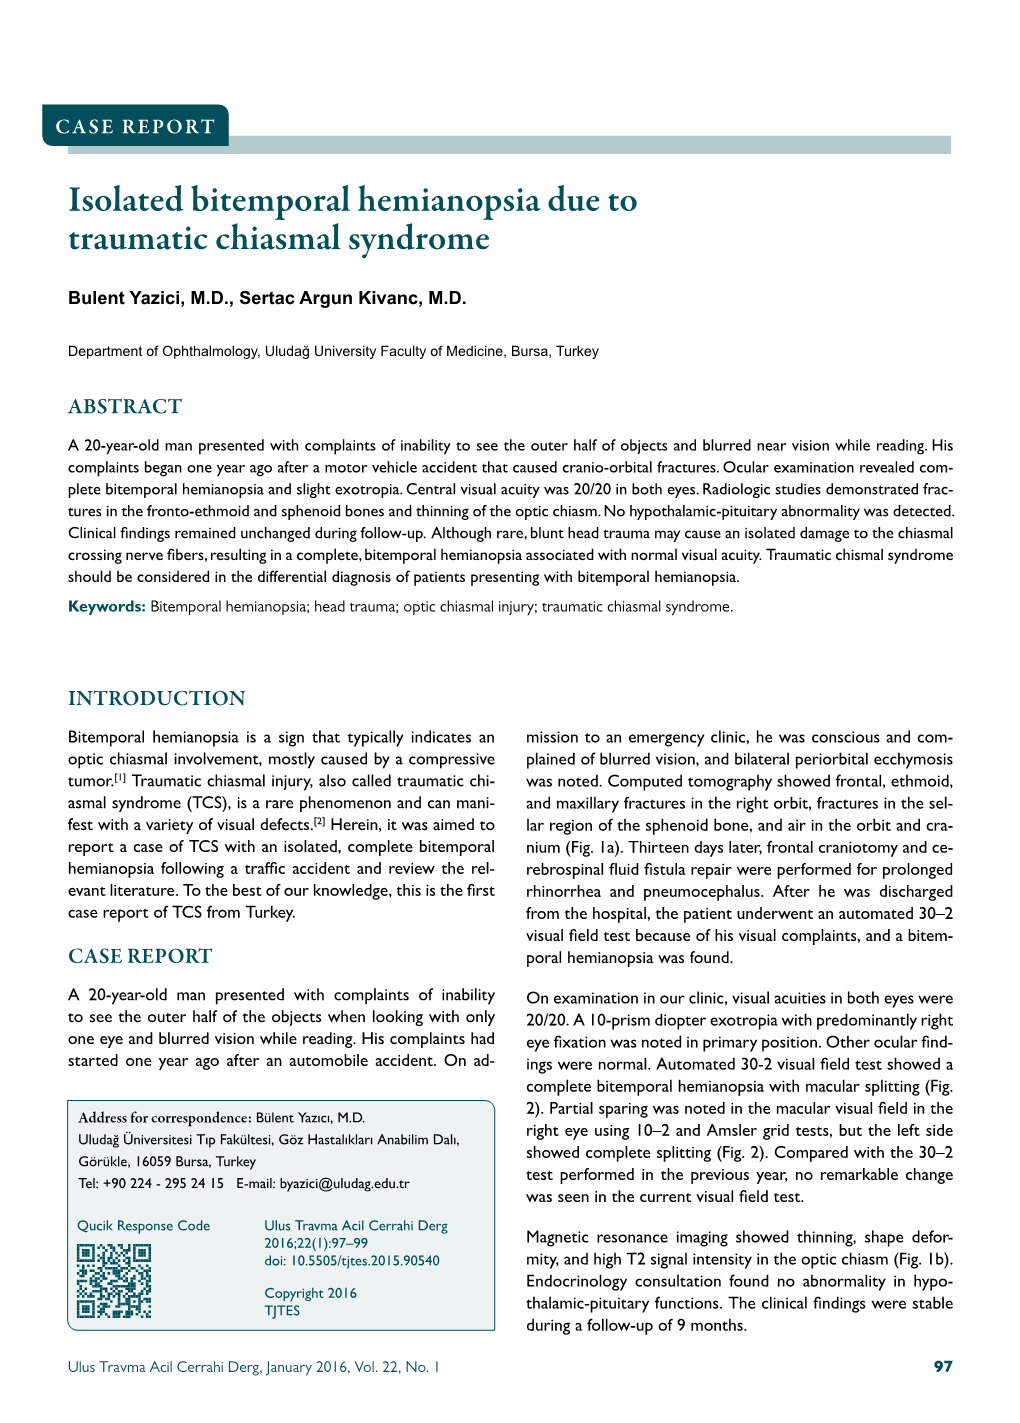 Isolated Bitemporal Hemianopsia Due to Traumatic Chiasmal Syndrome